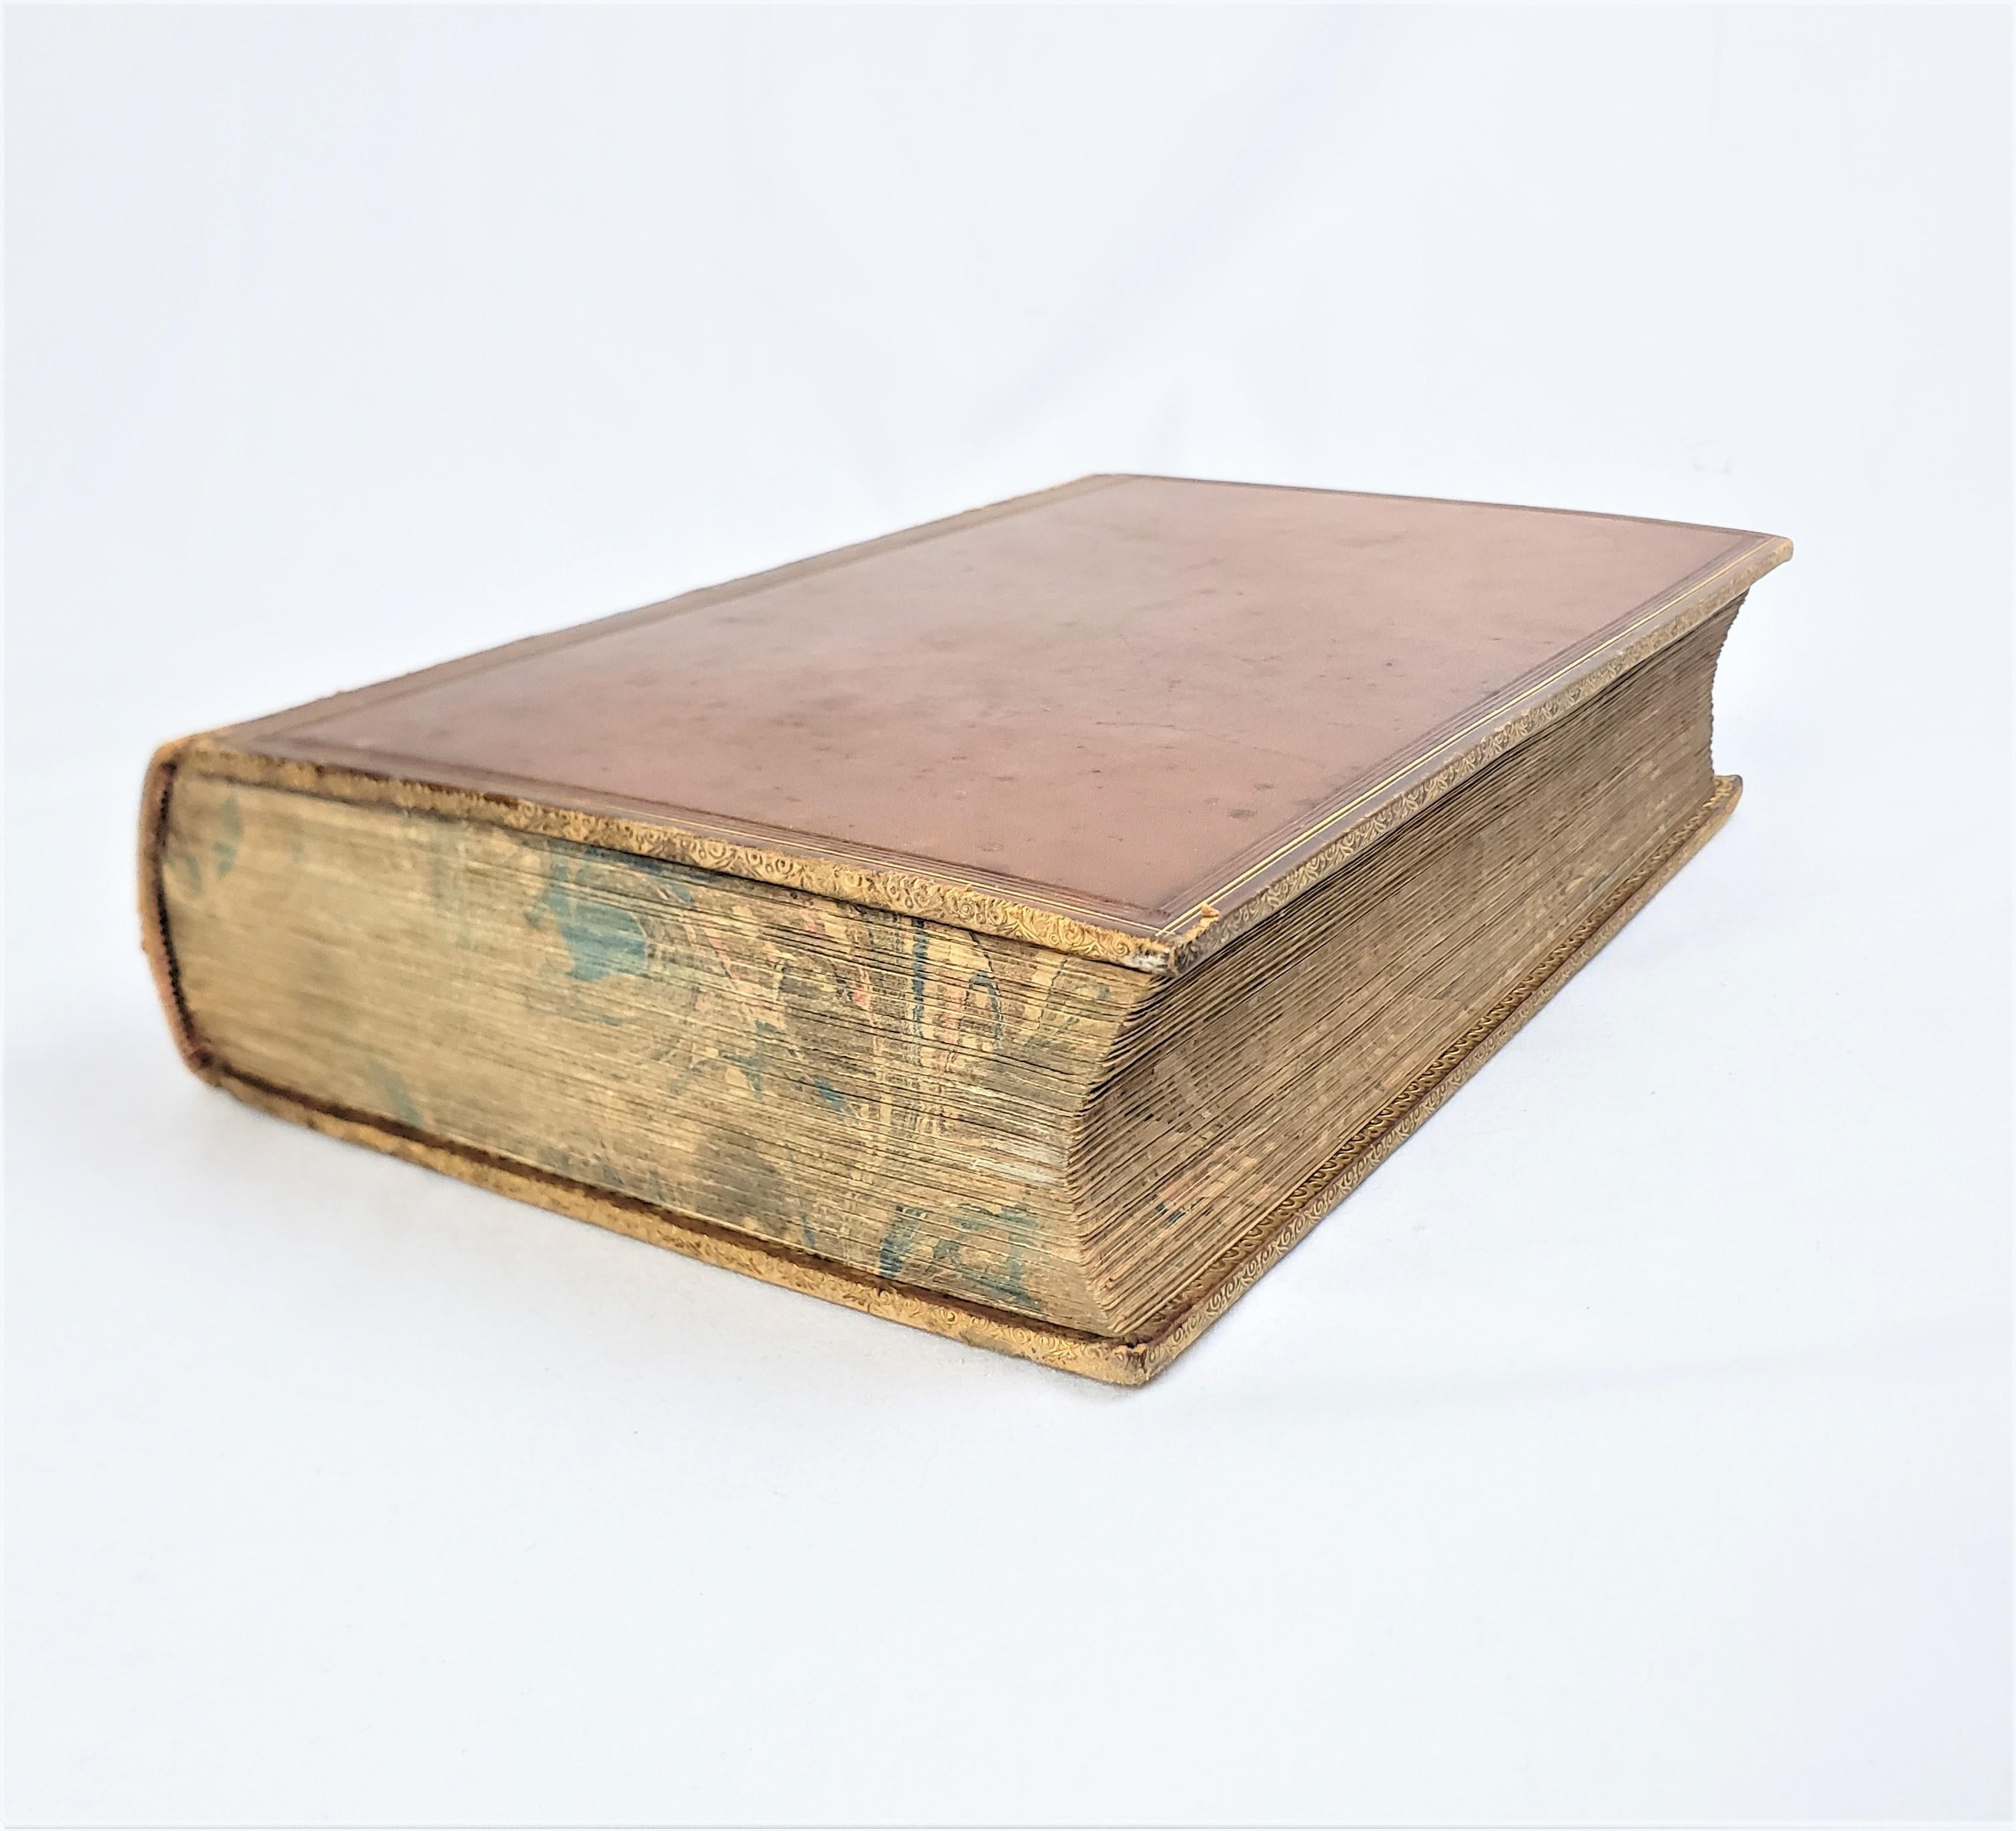 david copperfield by charles dickens first edition